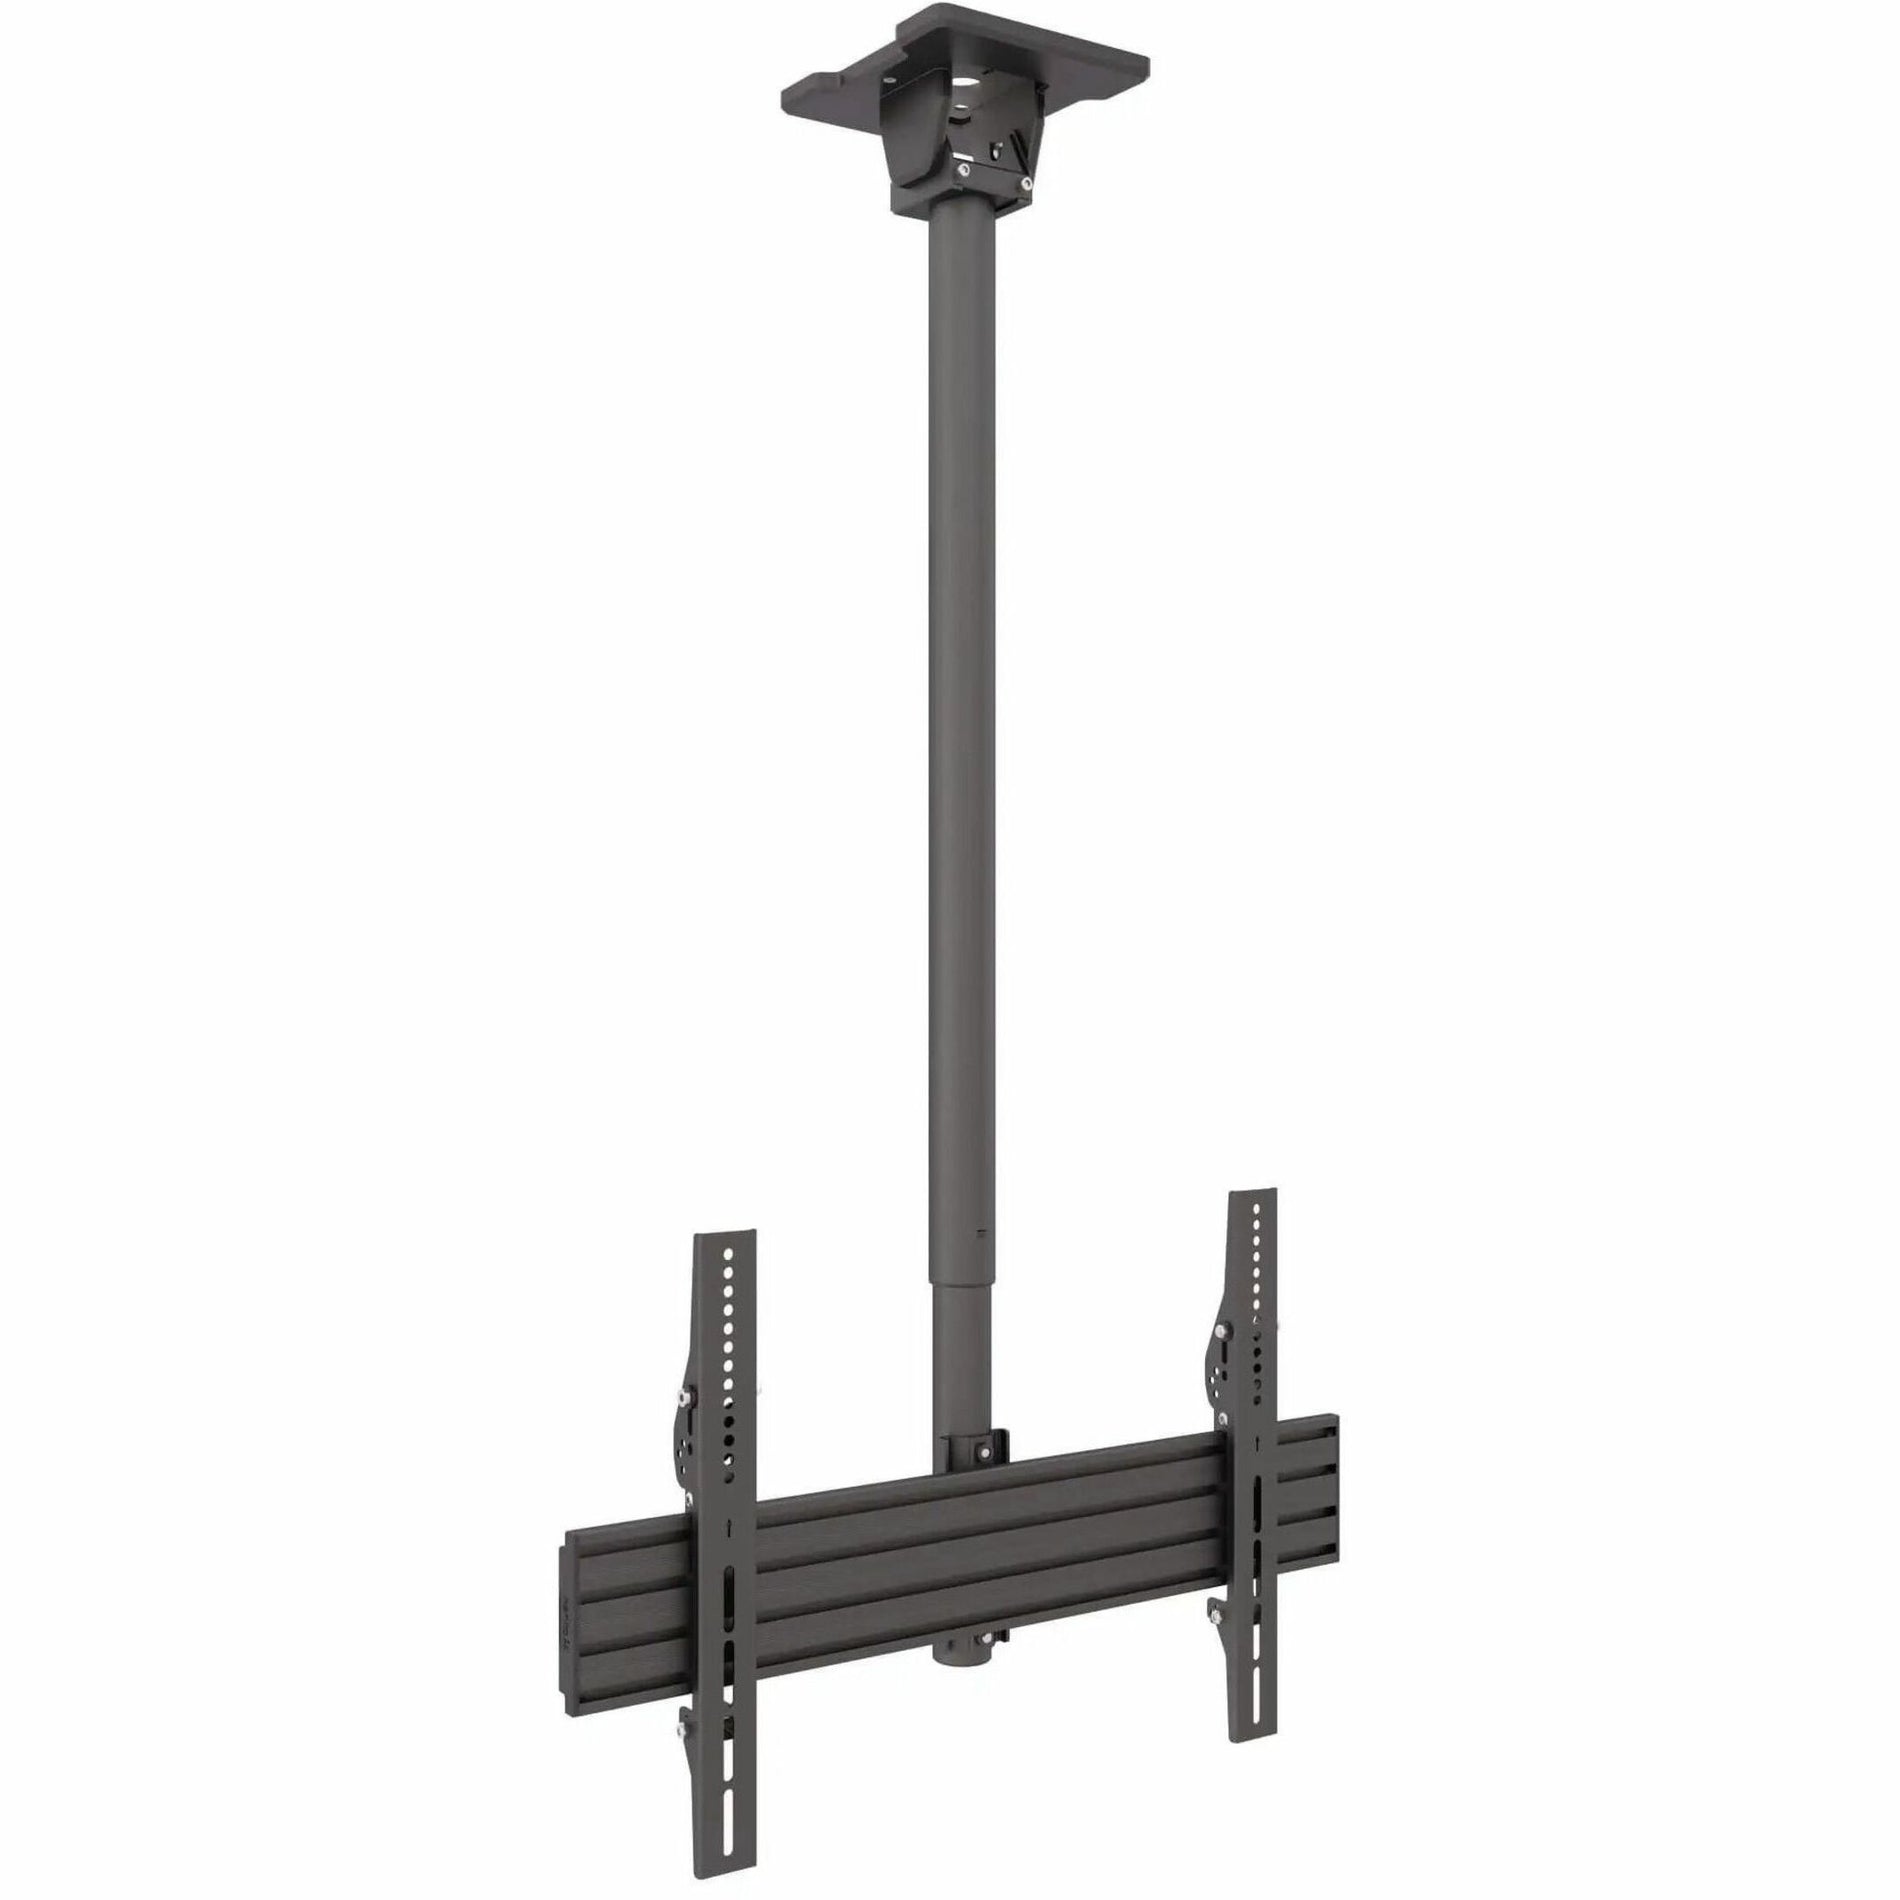 Kanto CM600SG Stainless Steel Outdoor Ceiling TV Mount, 360° Swivel, Rust Resistant, 110 lb Maximum Load Capacity